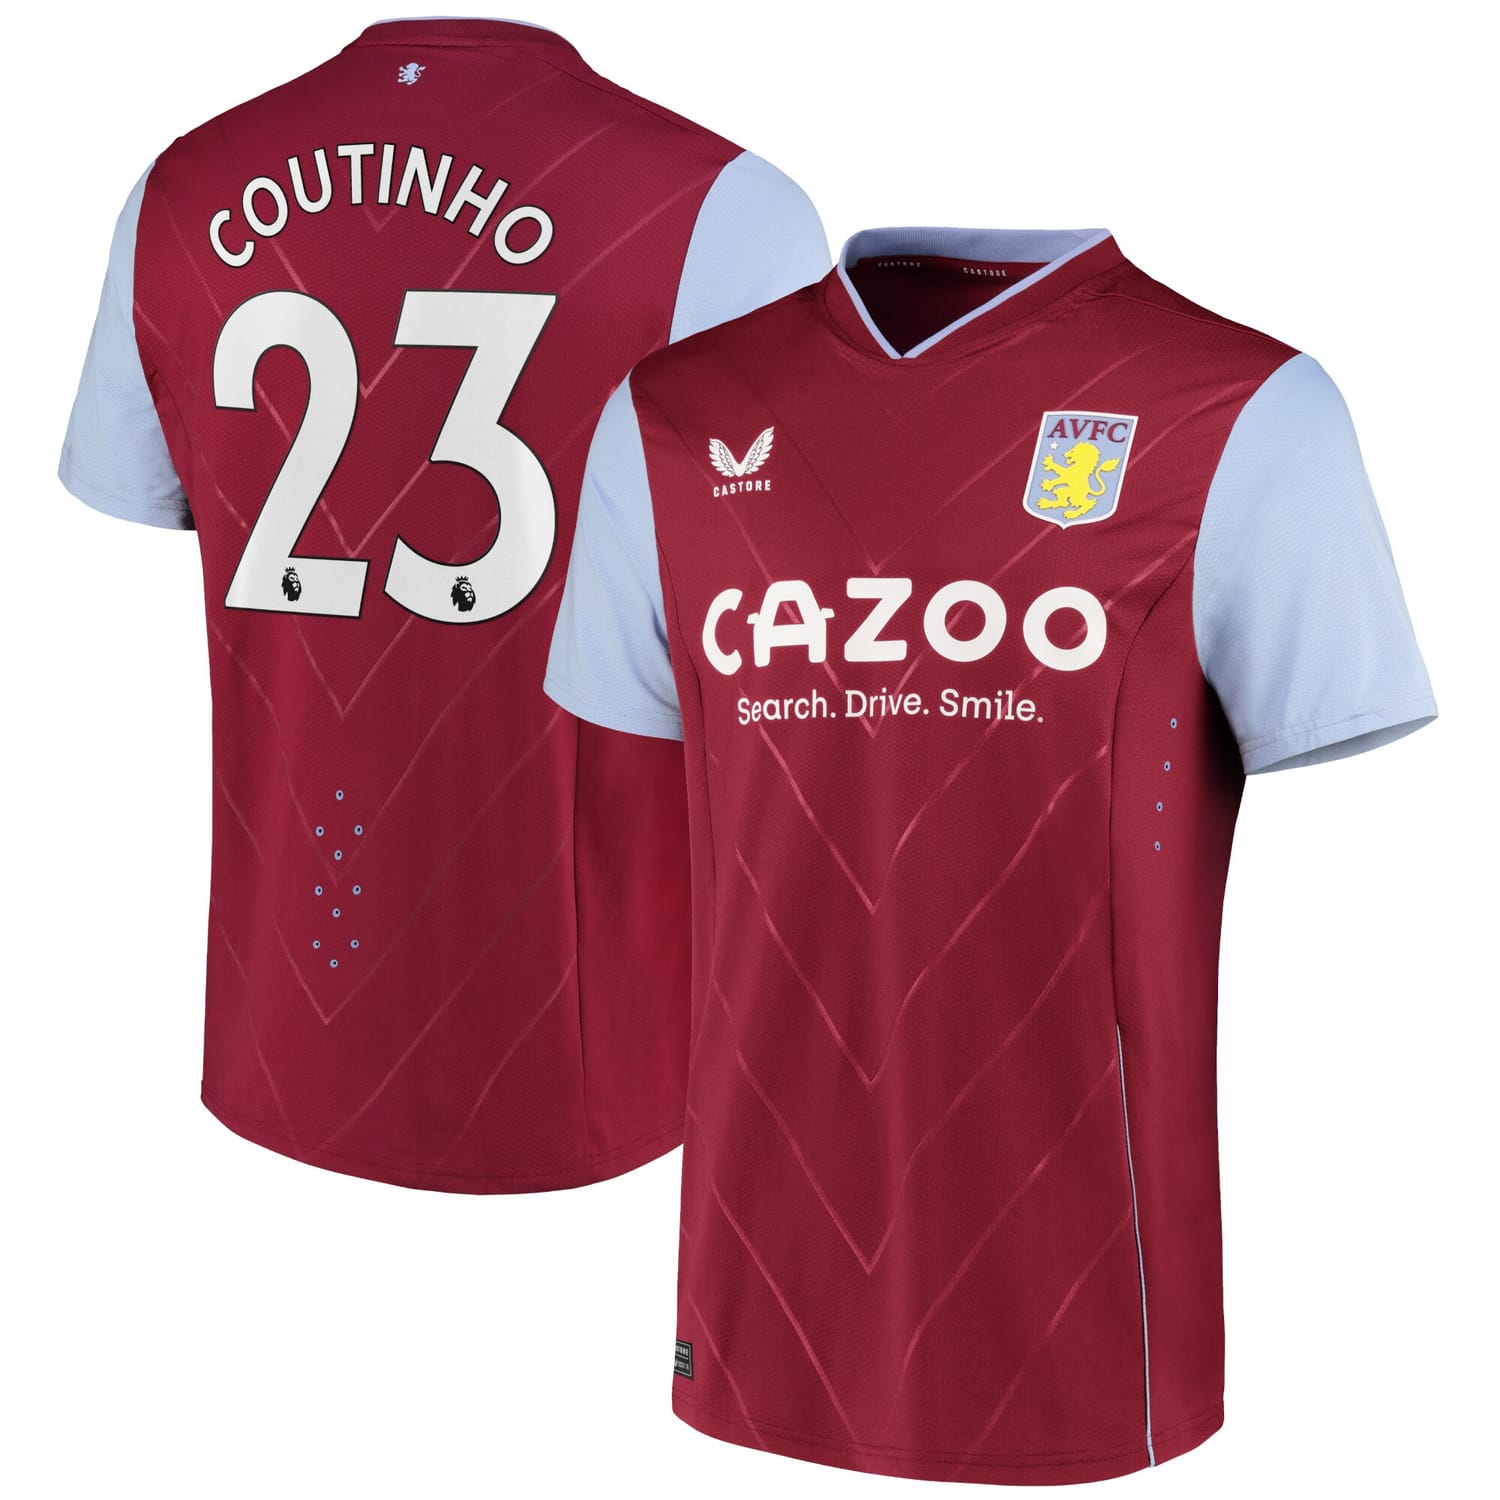 Premier League Ast. Villa Home Pro Jersey Shirt 2022-23 player Philippe Coutinho 23 printing for Men